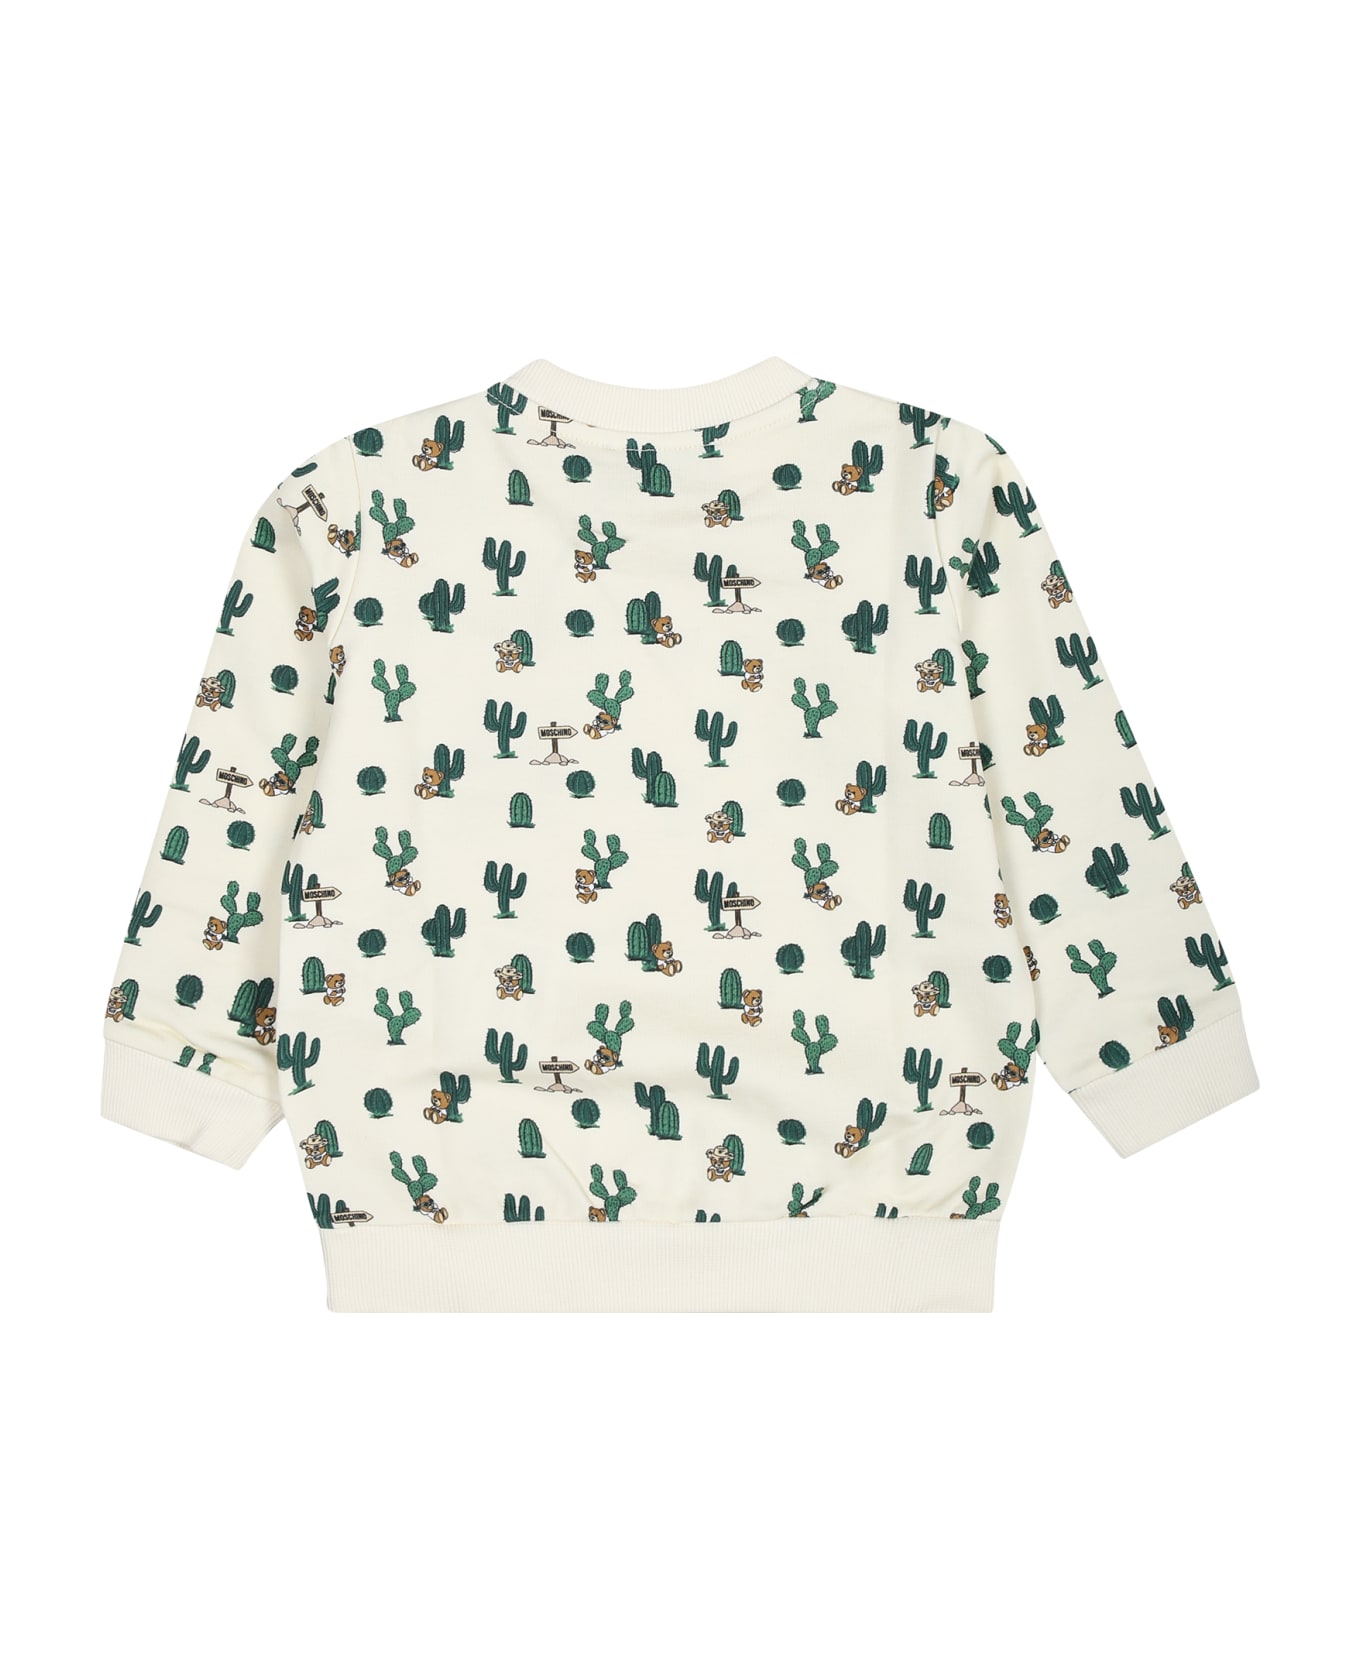 Moschino Ivory Sweatshirt For Baby Boy With Teddy Bear And Cactus - Ivory